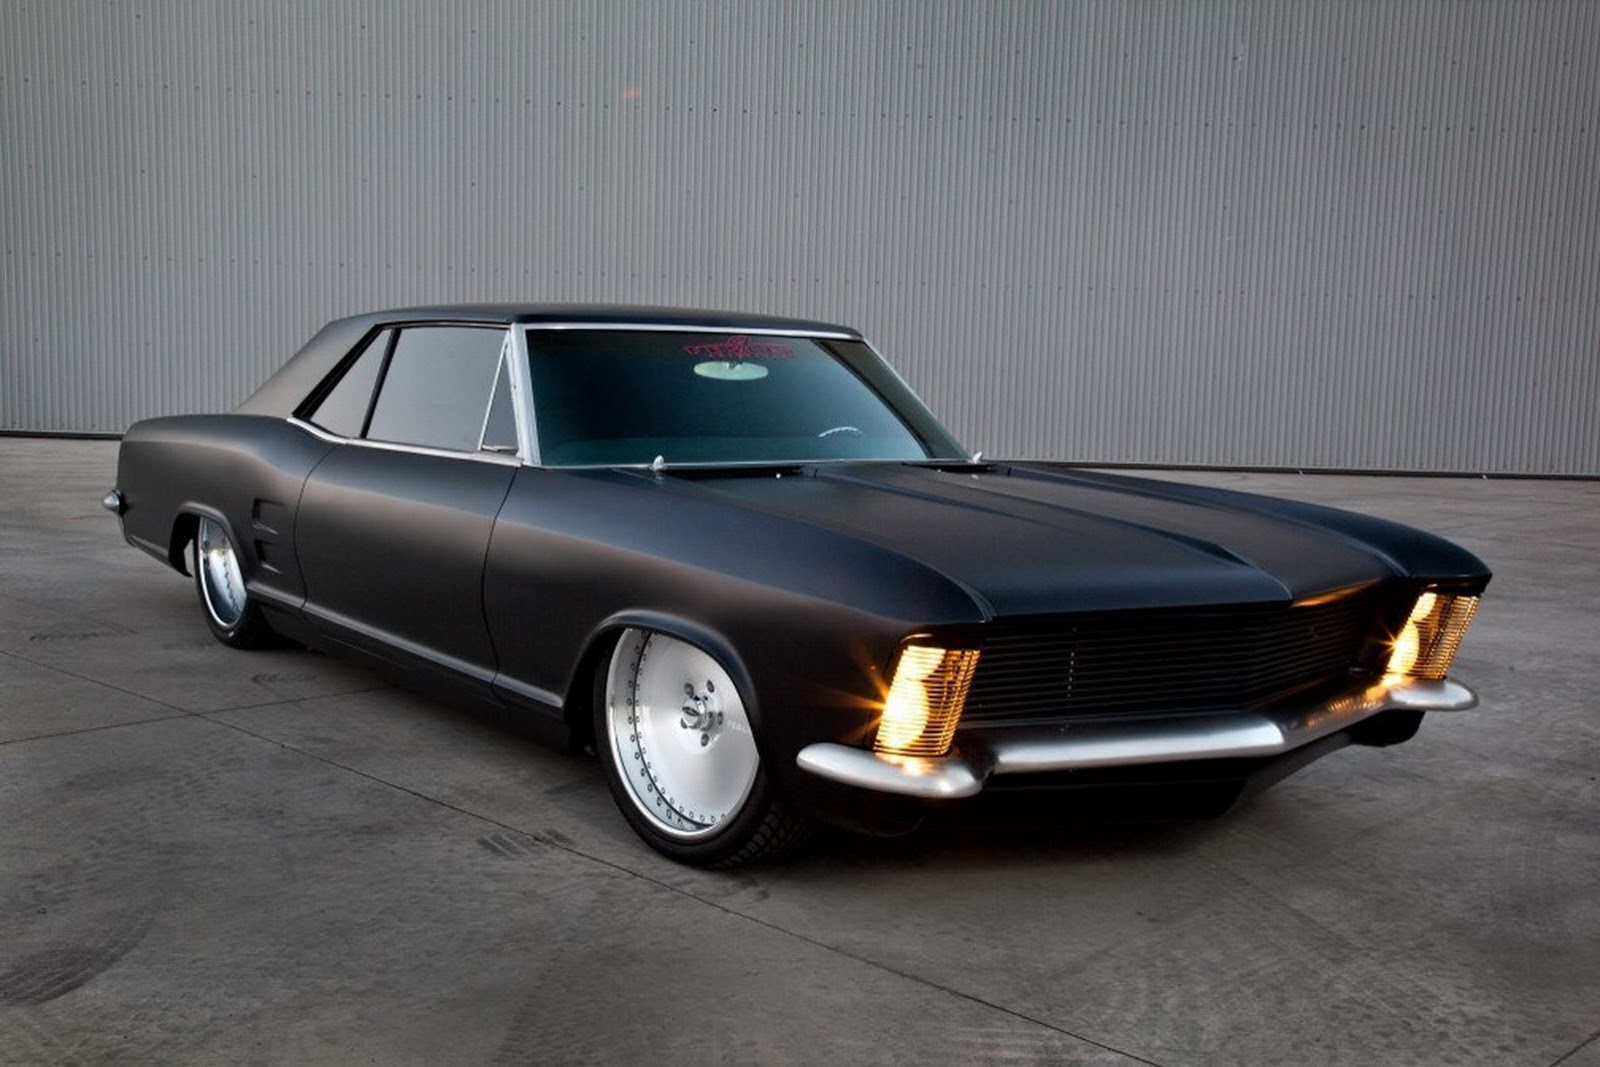 fesler-modified-1963-buick-riviera-looks-sinister-photo-gallery-56259_1.jpg